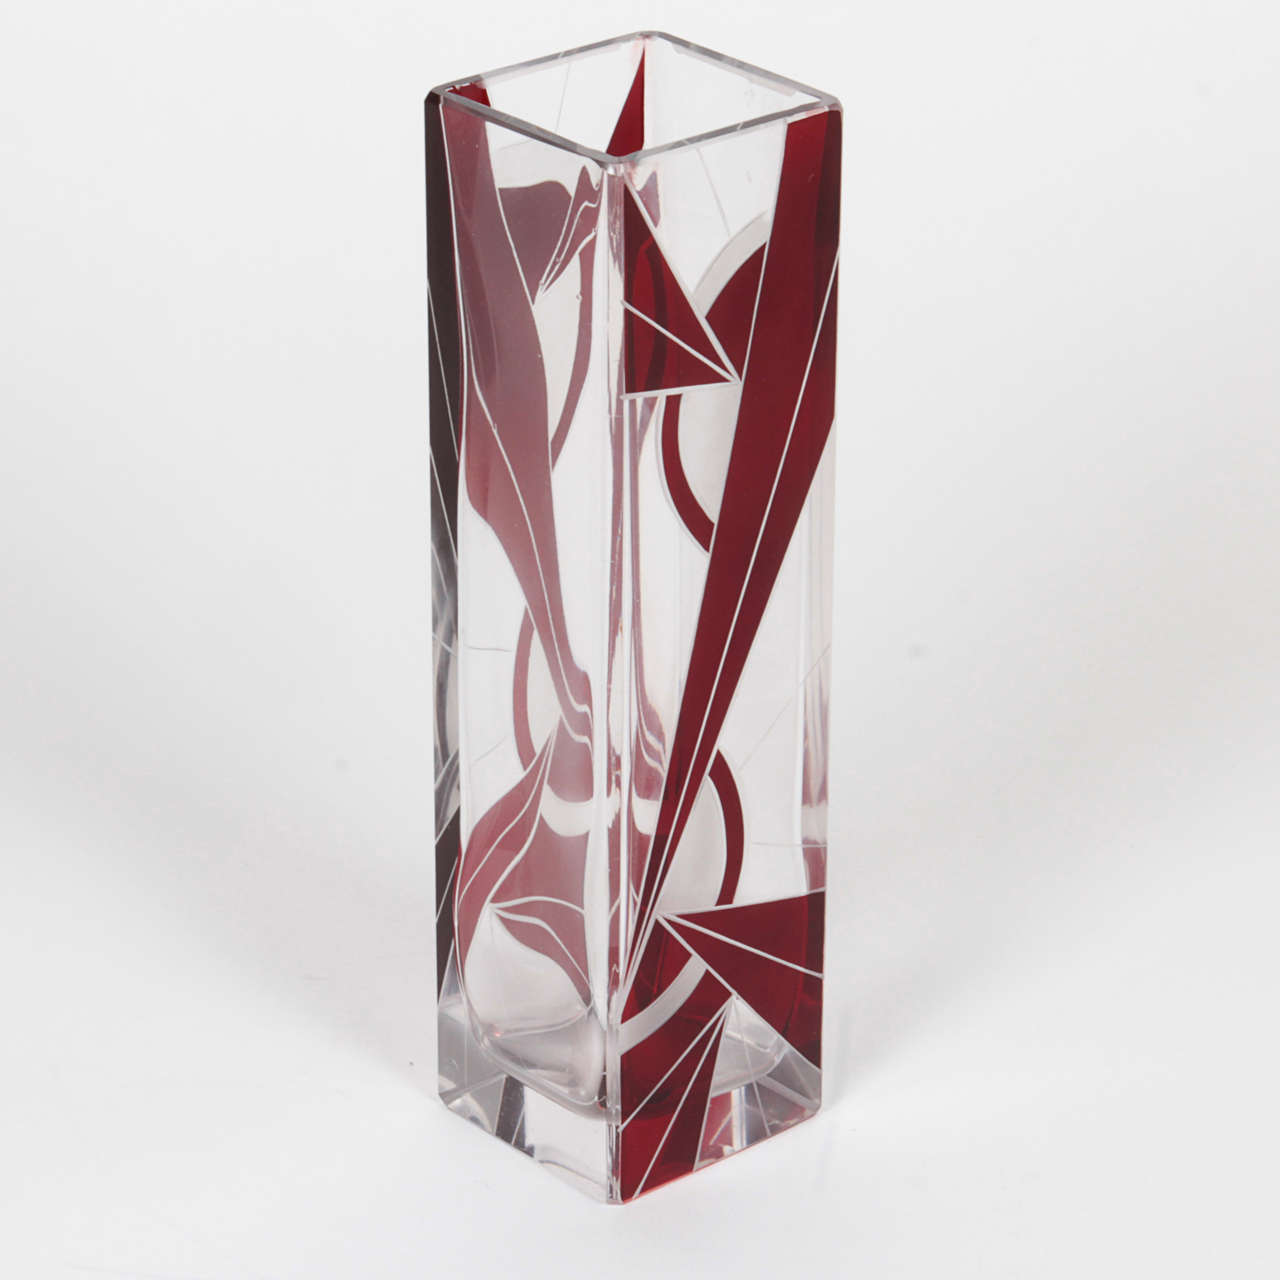 Vintage Art Deco Czech red and clear vase. The modern glass geometry is striking in contrast to the bold red pattern.